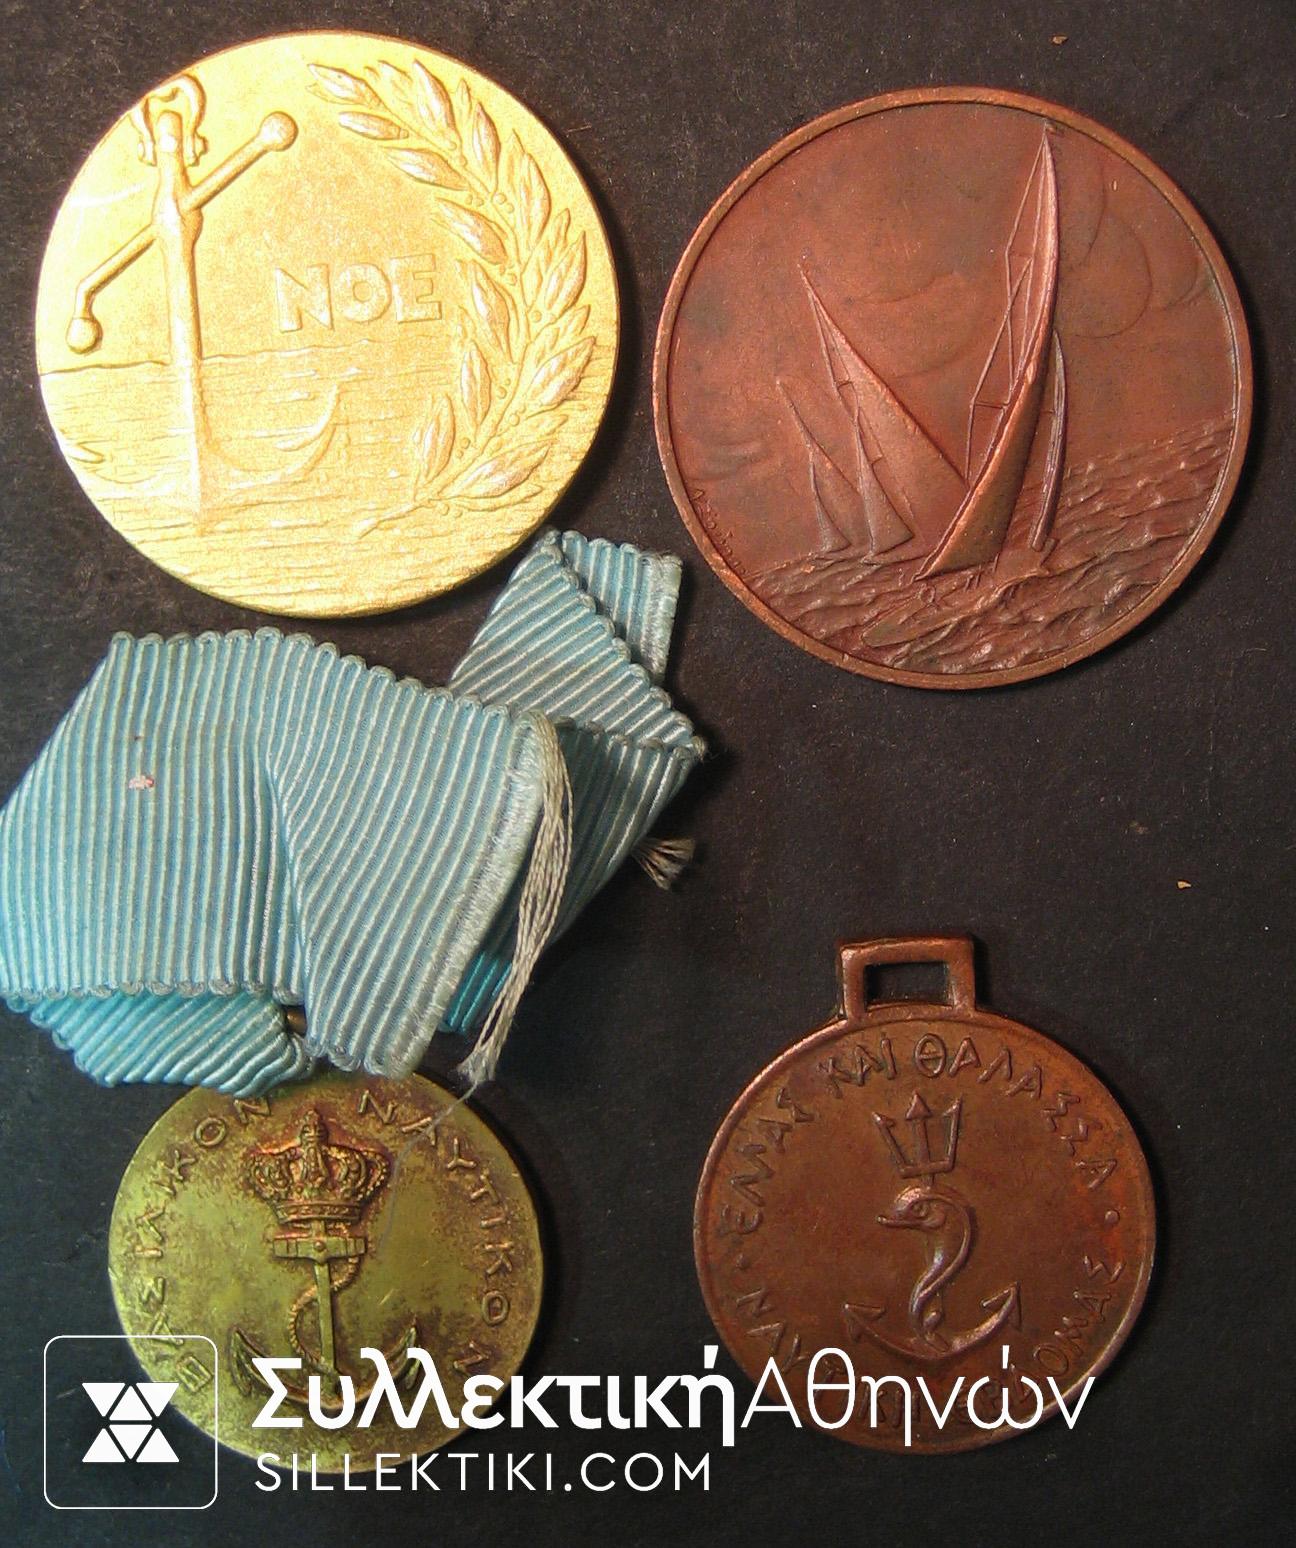 Collection of 4 Medals of Navy Games